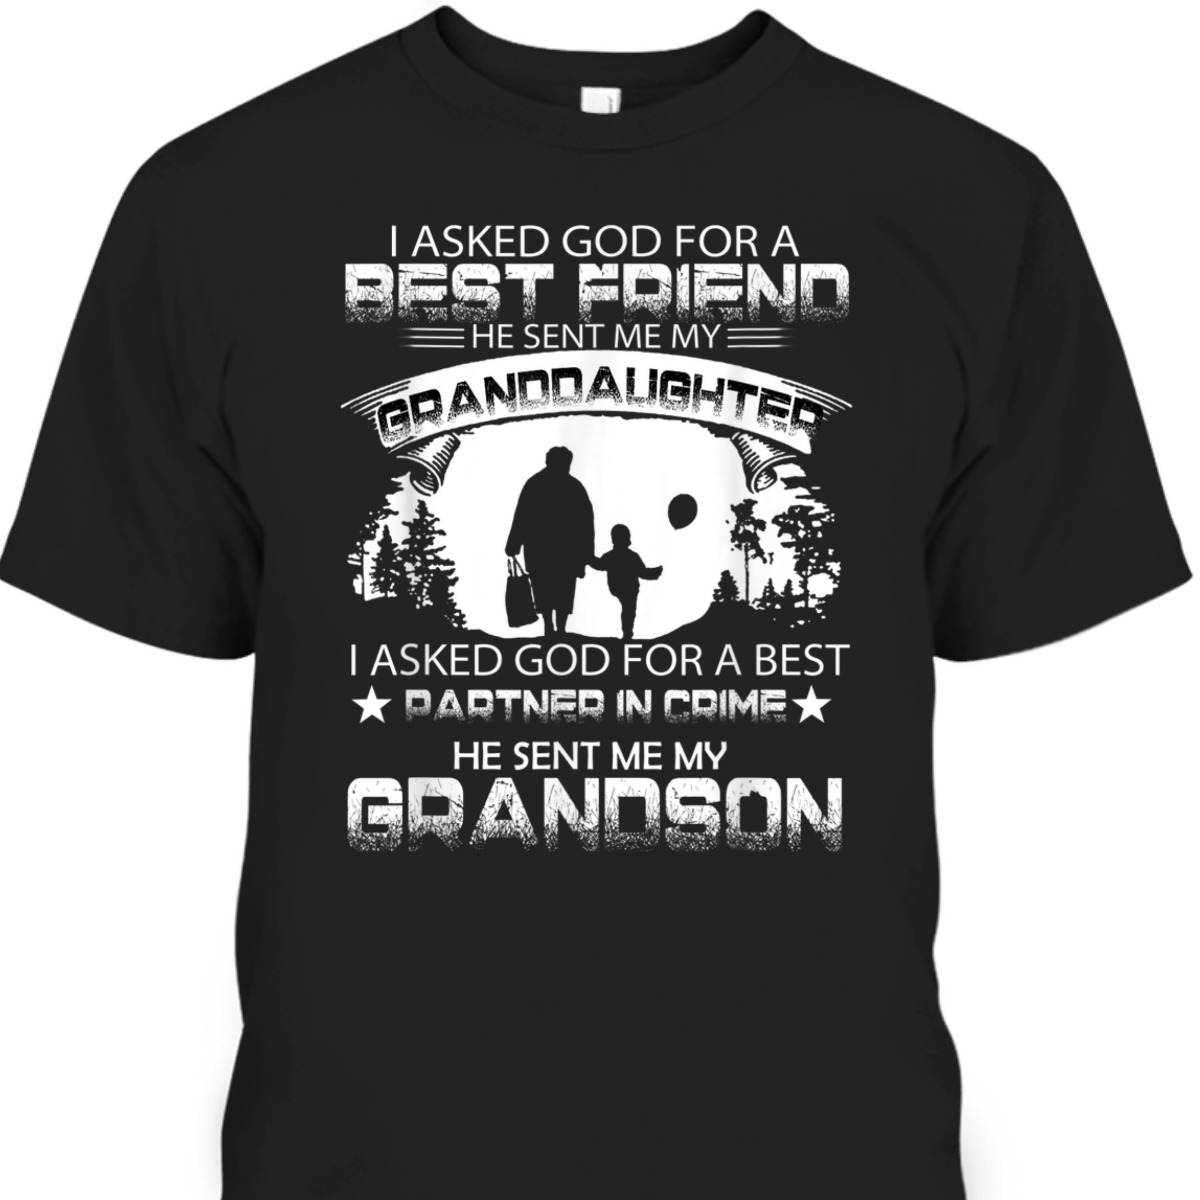 I Asked God For A Best Friend T-Shirt He Sent Me My Grand Daughter Father's Day Gift